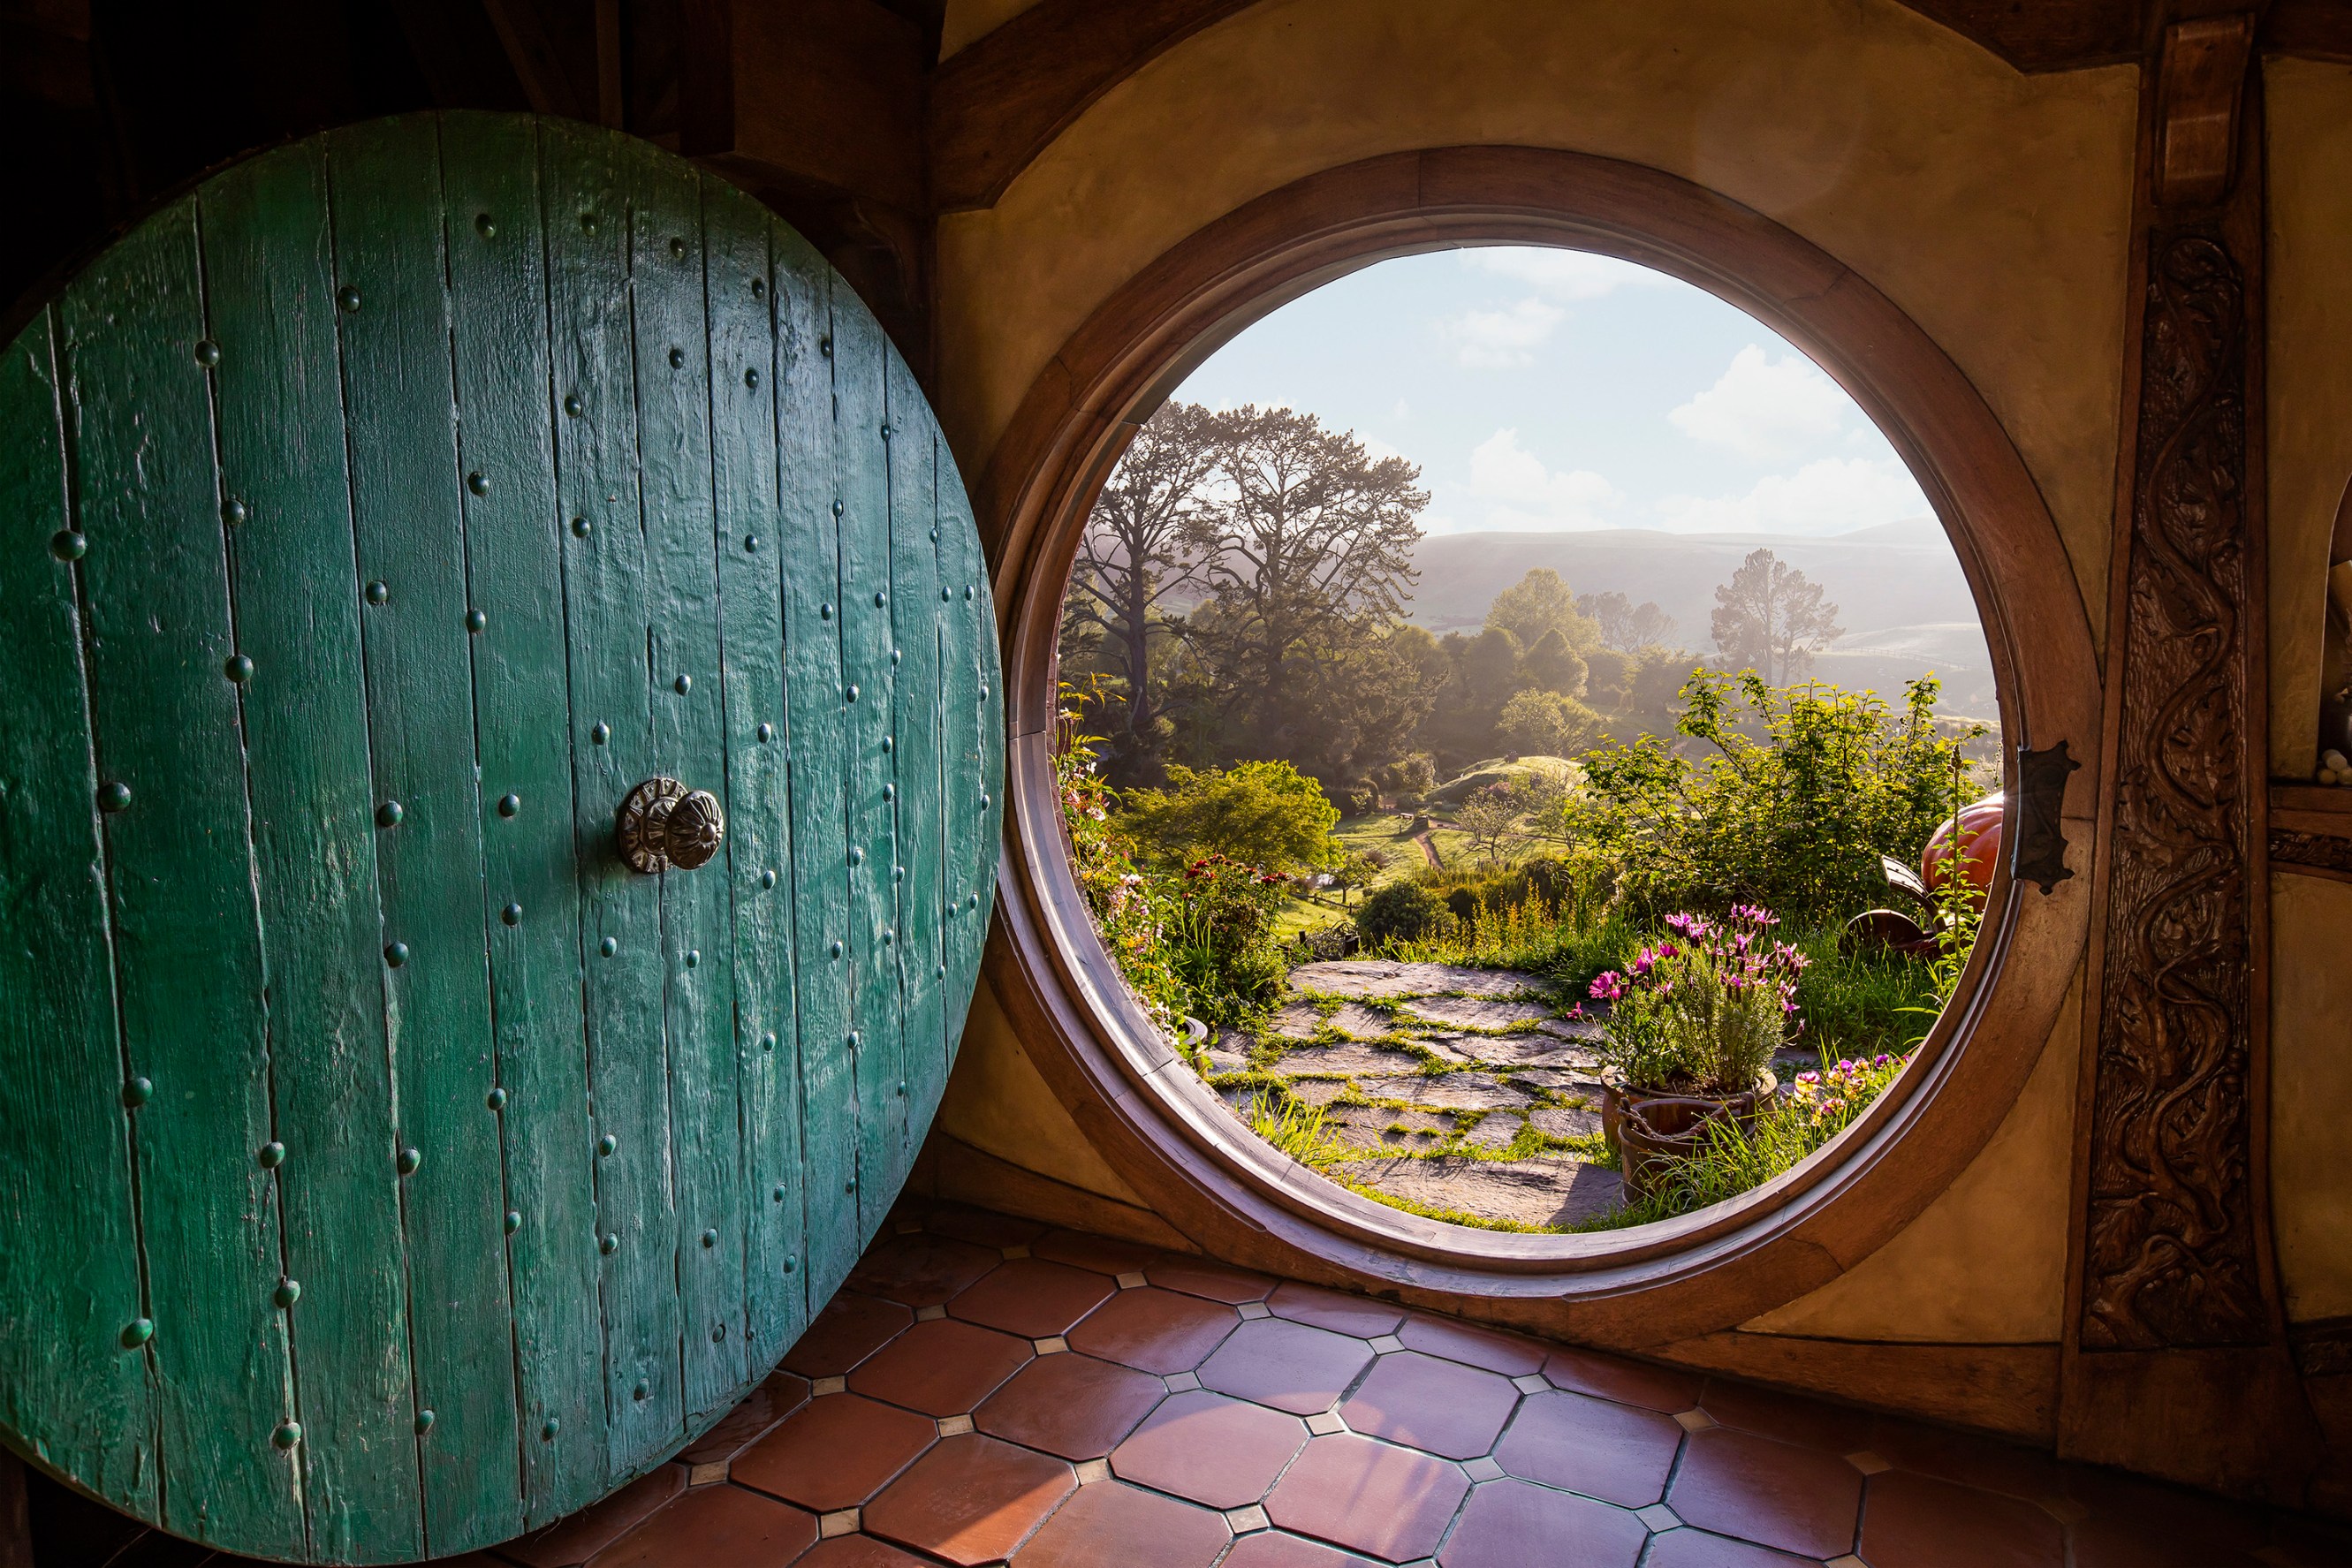 Sneeuwstorm Buiten een experiment doen The one-and-only Hobbiton from The Lord of the Rings is now on Airbnb